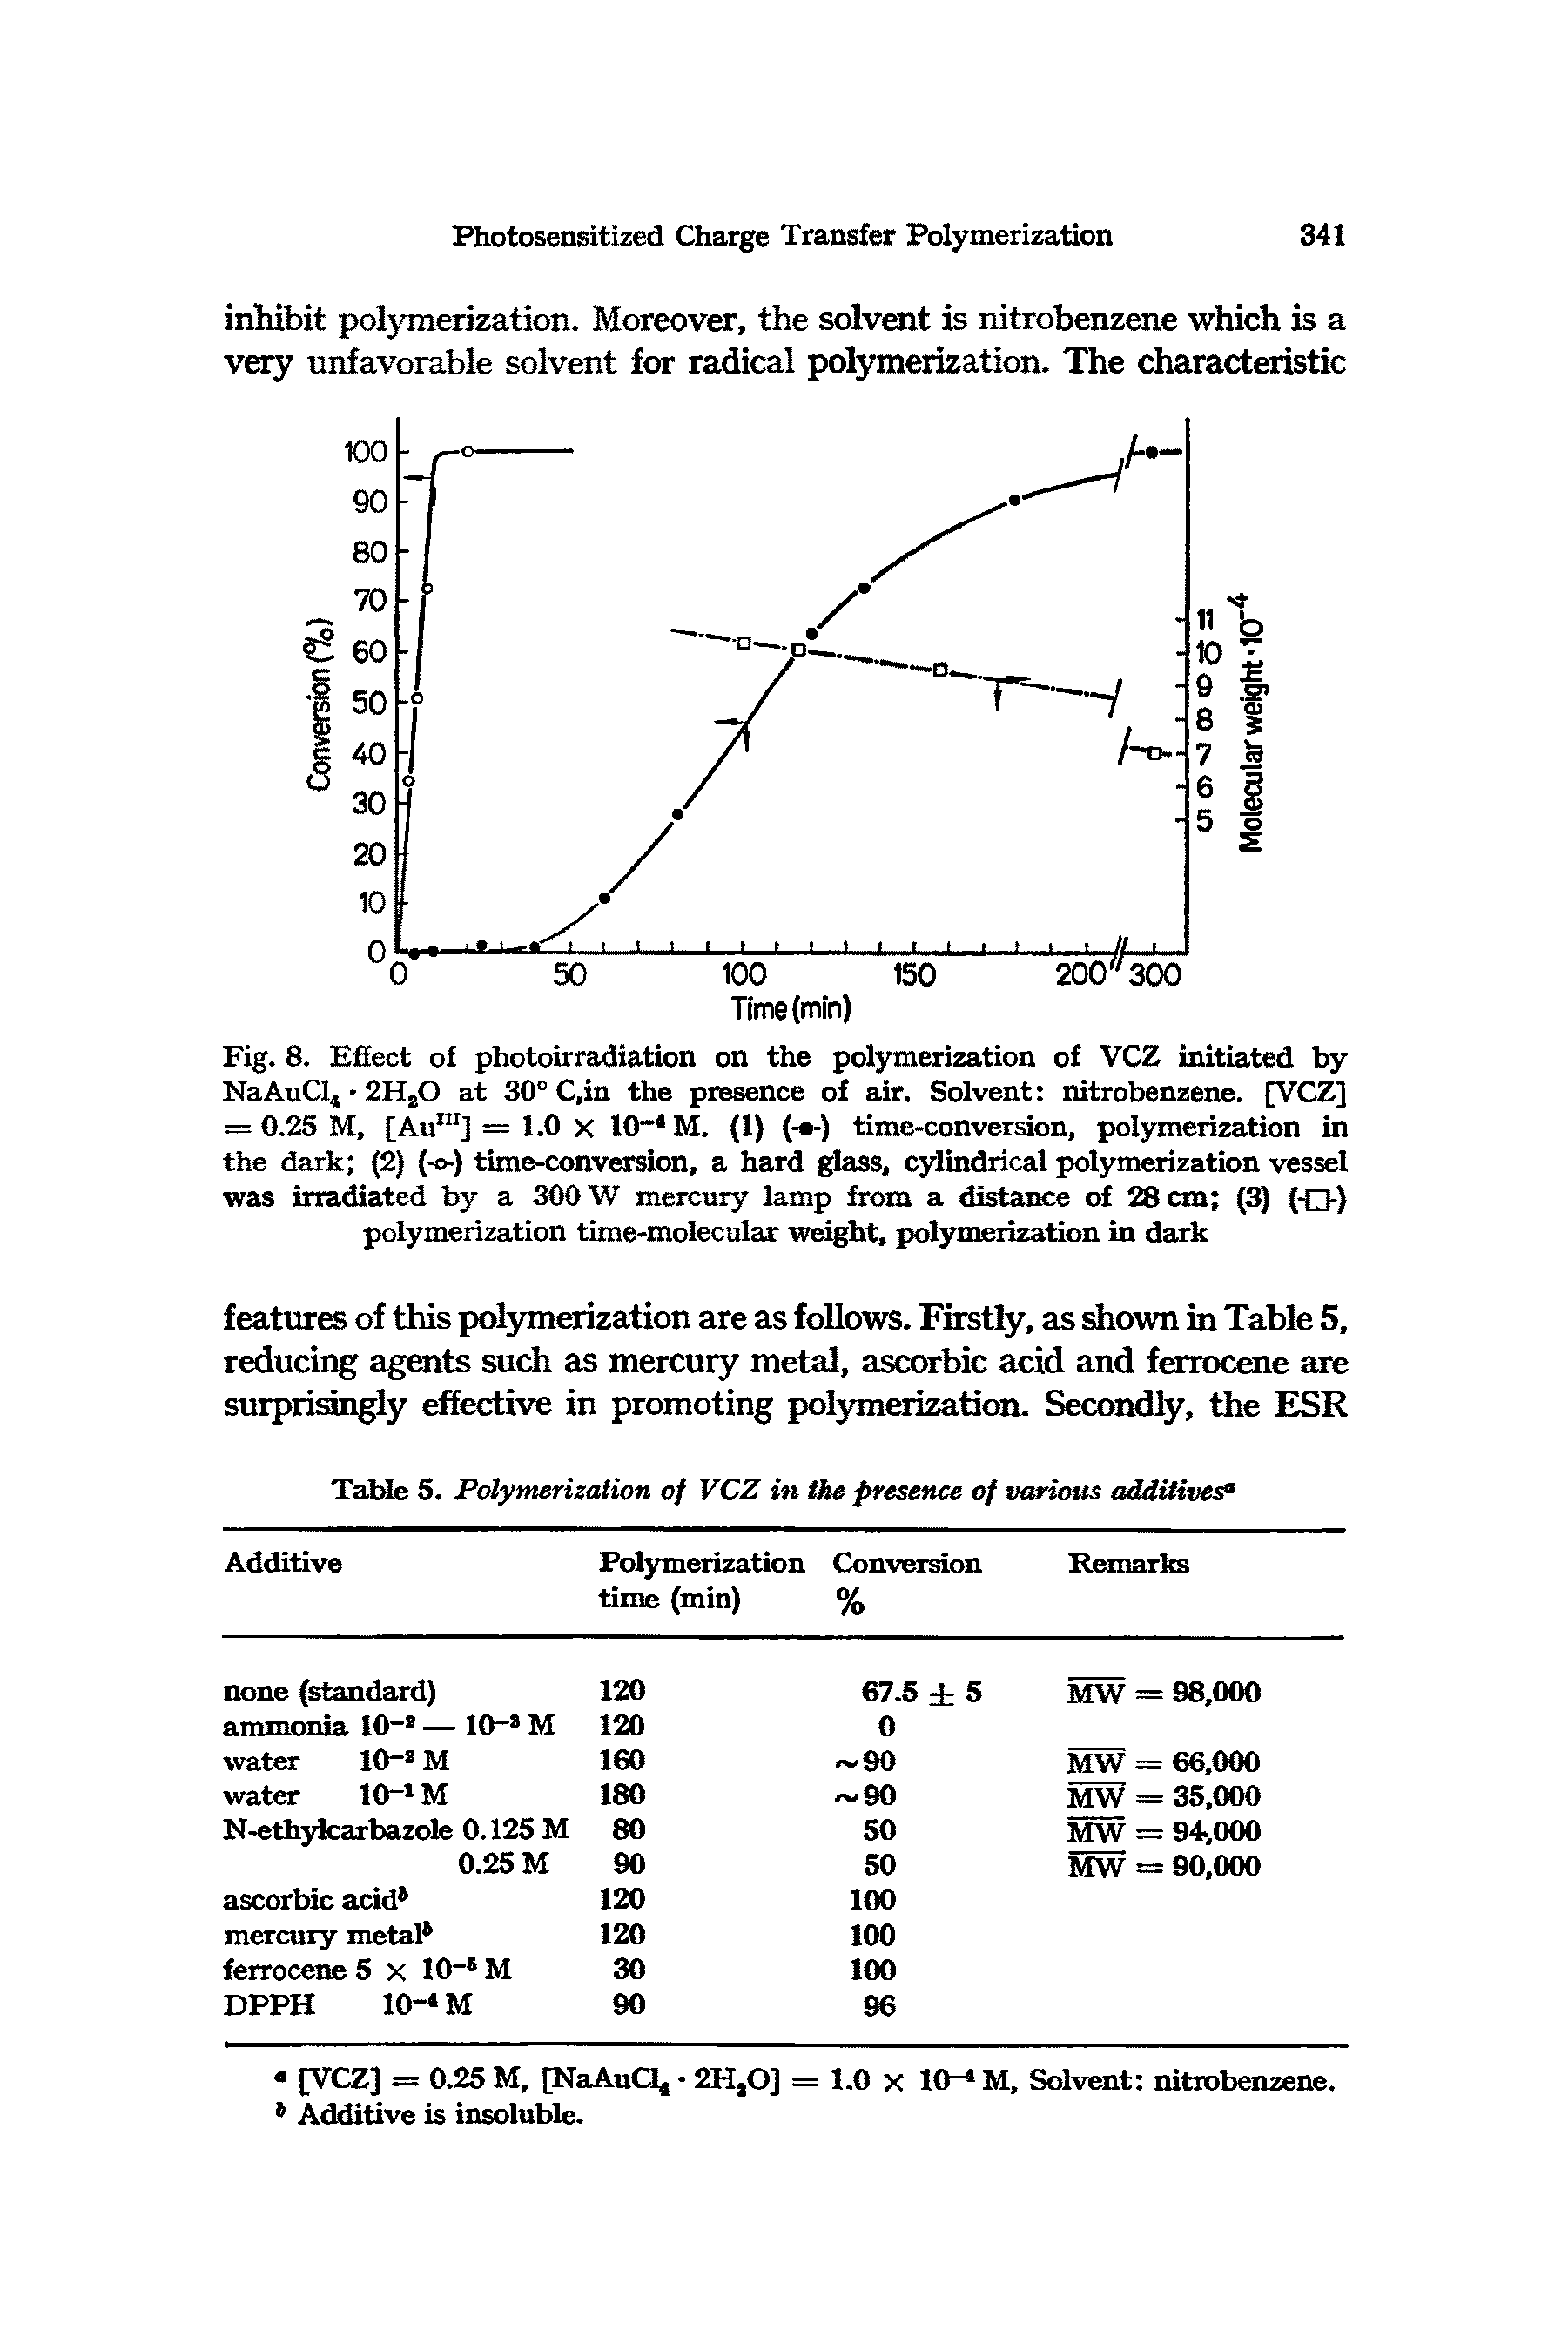 Fig. 8. Effect of photoirradiation on the polymerization of VCZ initiated by NaAuClj 2H20 at 30° C,in the presence of air. Solvent nitrobenzene. [VCZ] = 0.25 M, [AunlJ = 1.0 x 10- M. (1) (- -) time-conversion, polymerization in the dark (2) (-o-) time-conversion, a hard glass, cylindrical polymerization vessel was irradiated by a 300 W mercury lamp from a distance of 28 cm (3) (-O-) polymerization time-molecular weight, polymerization in dark...